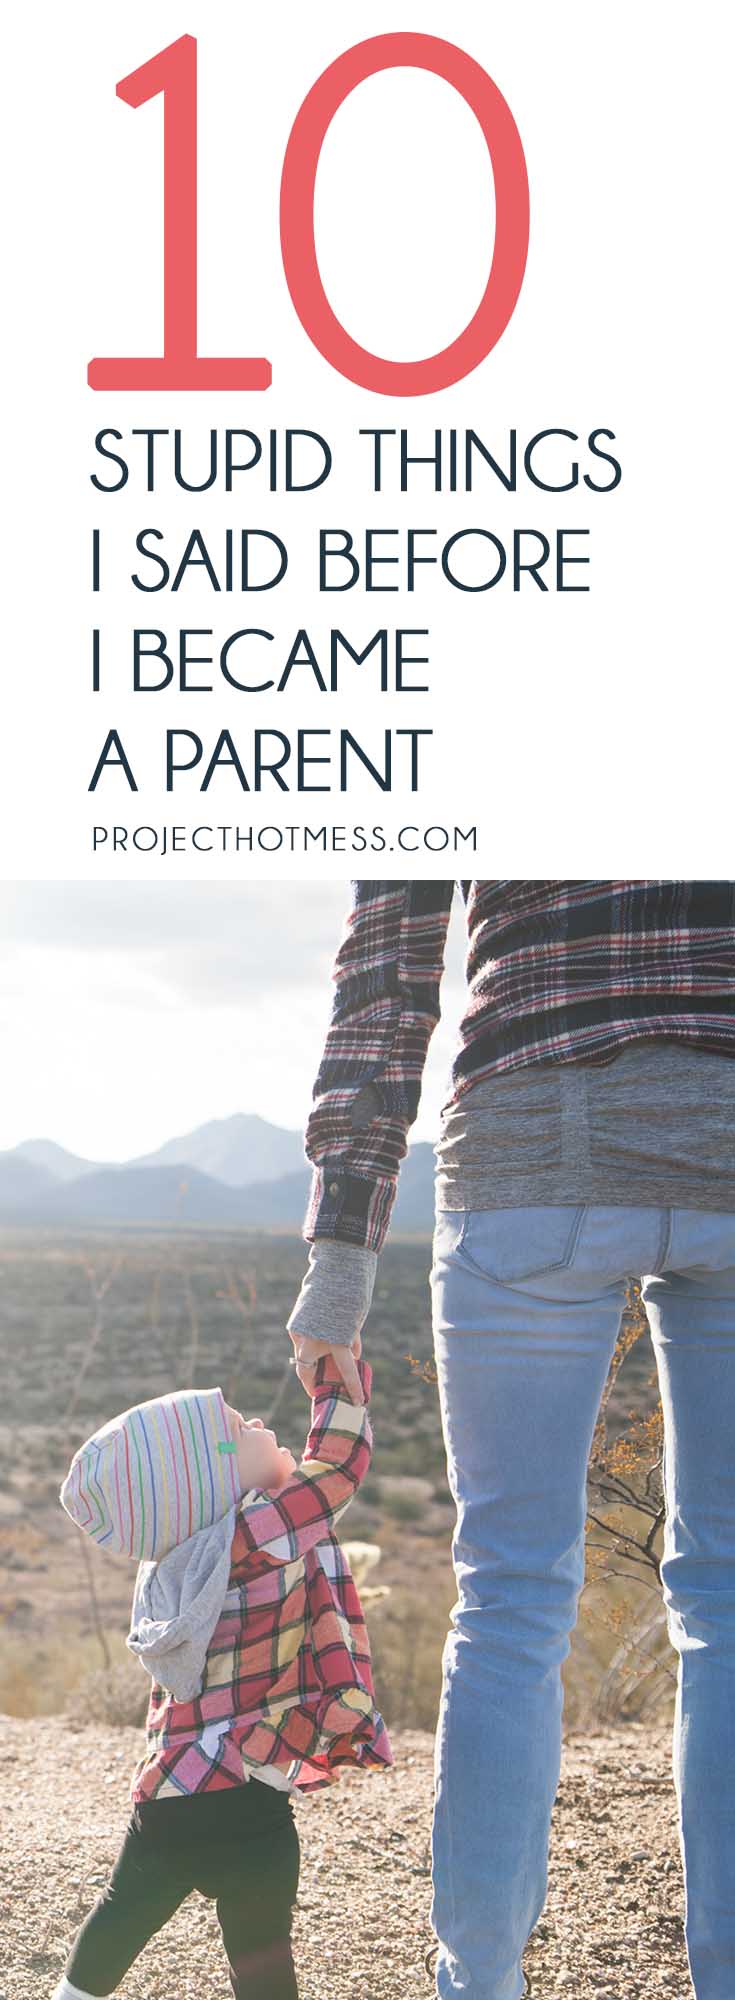 Before I became a parent, I knew a whole lot about parenting. Now I am a parent I realise how wrong I was and all the stupid things I said, it's amusing. Parenting | Parenting Advice | Mom Life | Parenting Goals | Parenting Ideas | Parenting Tips | Parenting Types | Parenting Hacks | Positive Parenting | Parenthood | Motherhood | Surviving Motherhood